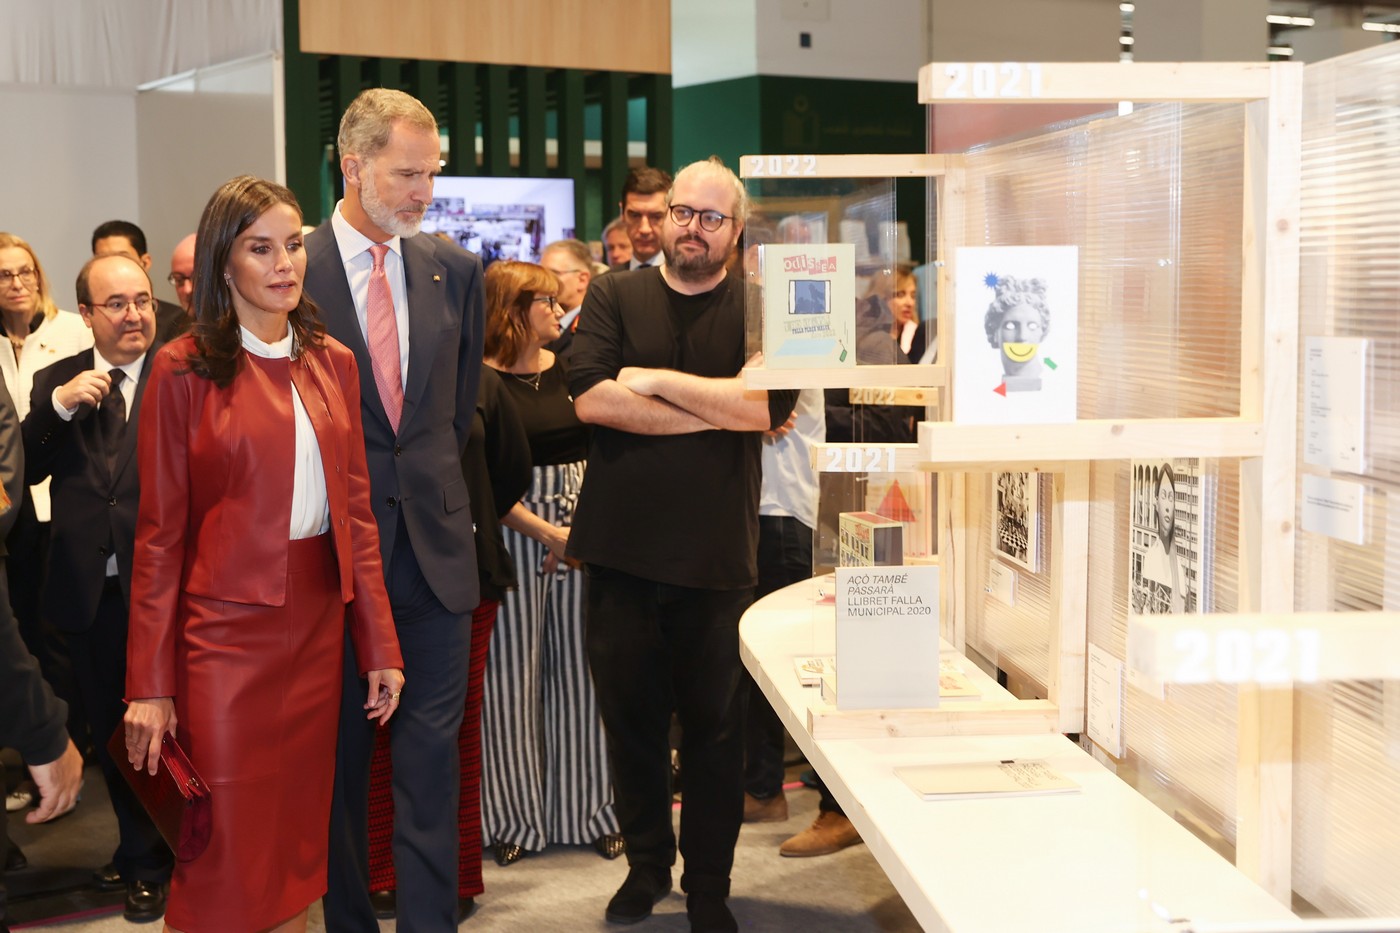 King Felipe and Queen Letizia of Spain began the last day of the German state visit with a visit to the Frankfurt Book Fair at the Messe Frankfurt Congress Center. After the visit to Book Fair the couple visited Cervantes Institute before heading home.